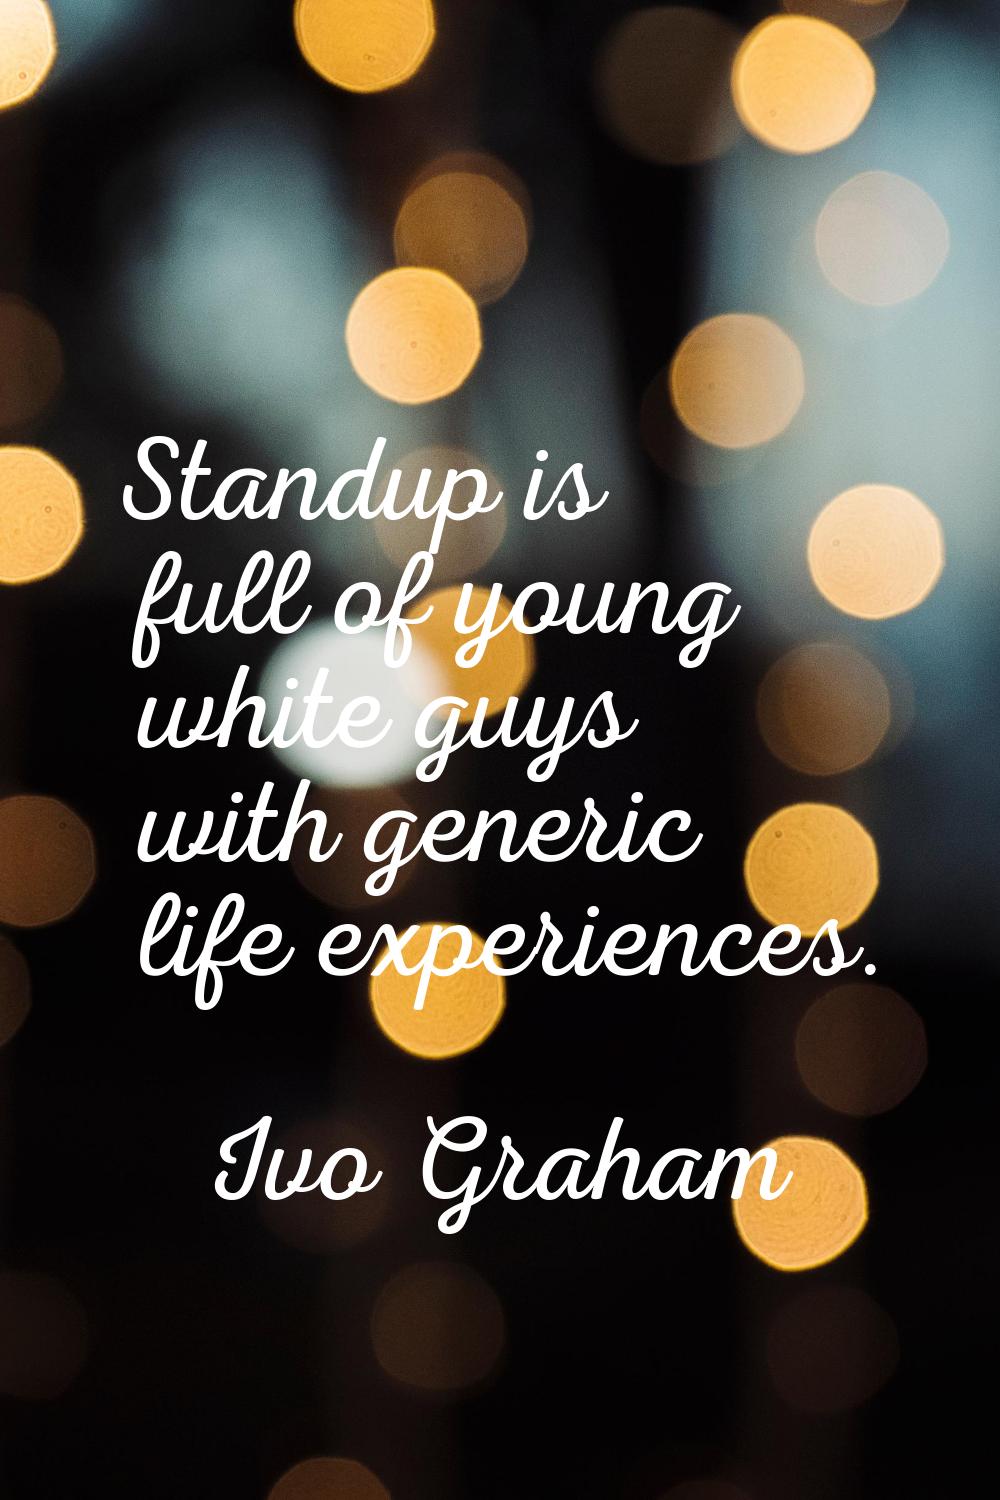 Standup is full of young white guys with generic life experiences.